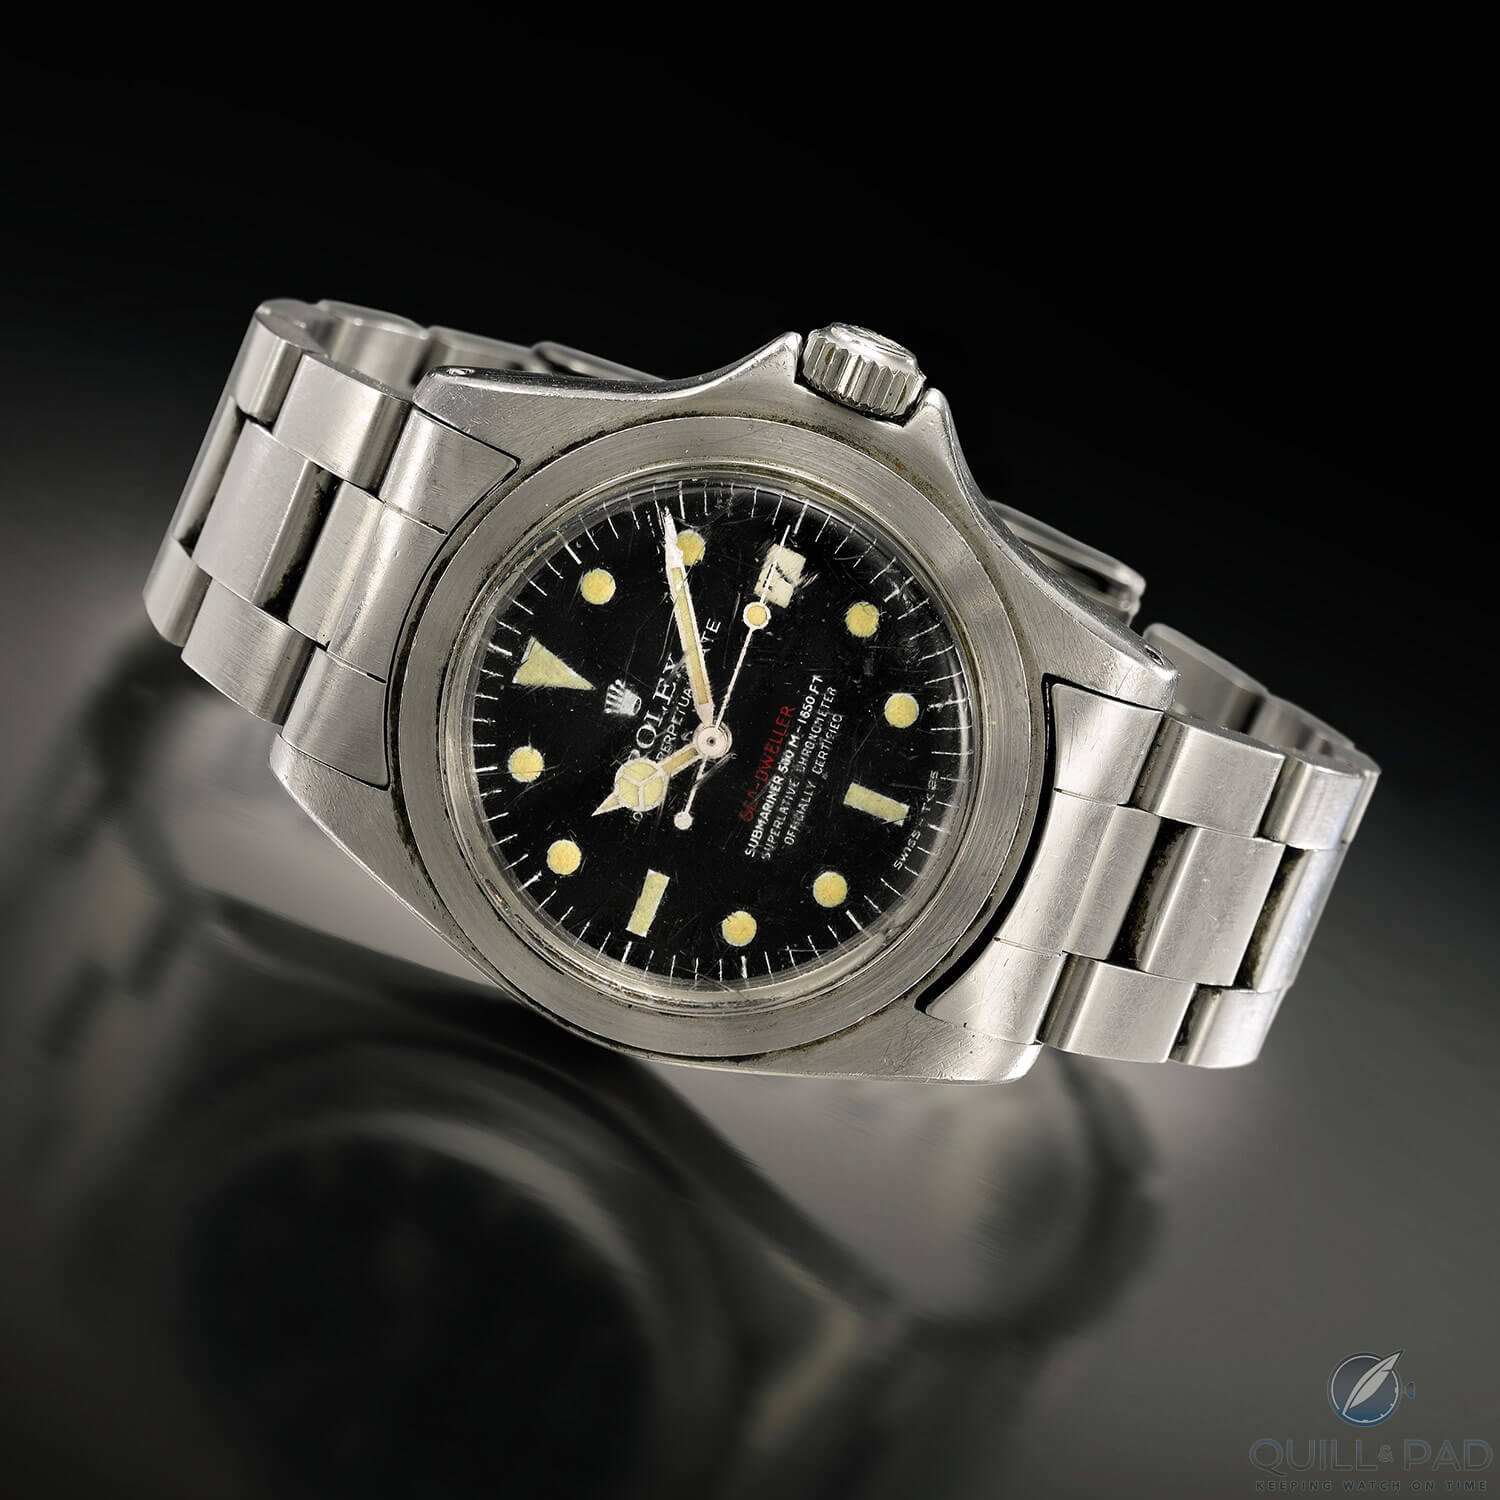 A prototype Rolex Sea-Dweller without the helium escape valve sold at Sotheby’s in 2013 (photo courtesy Sotheby’s)